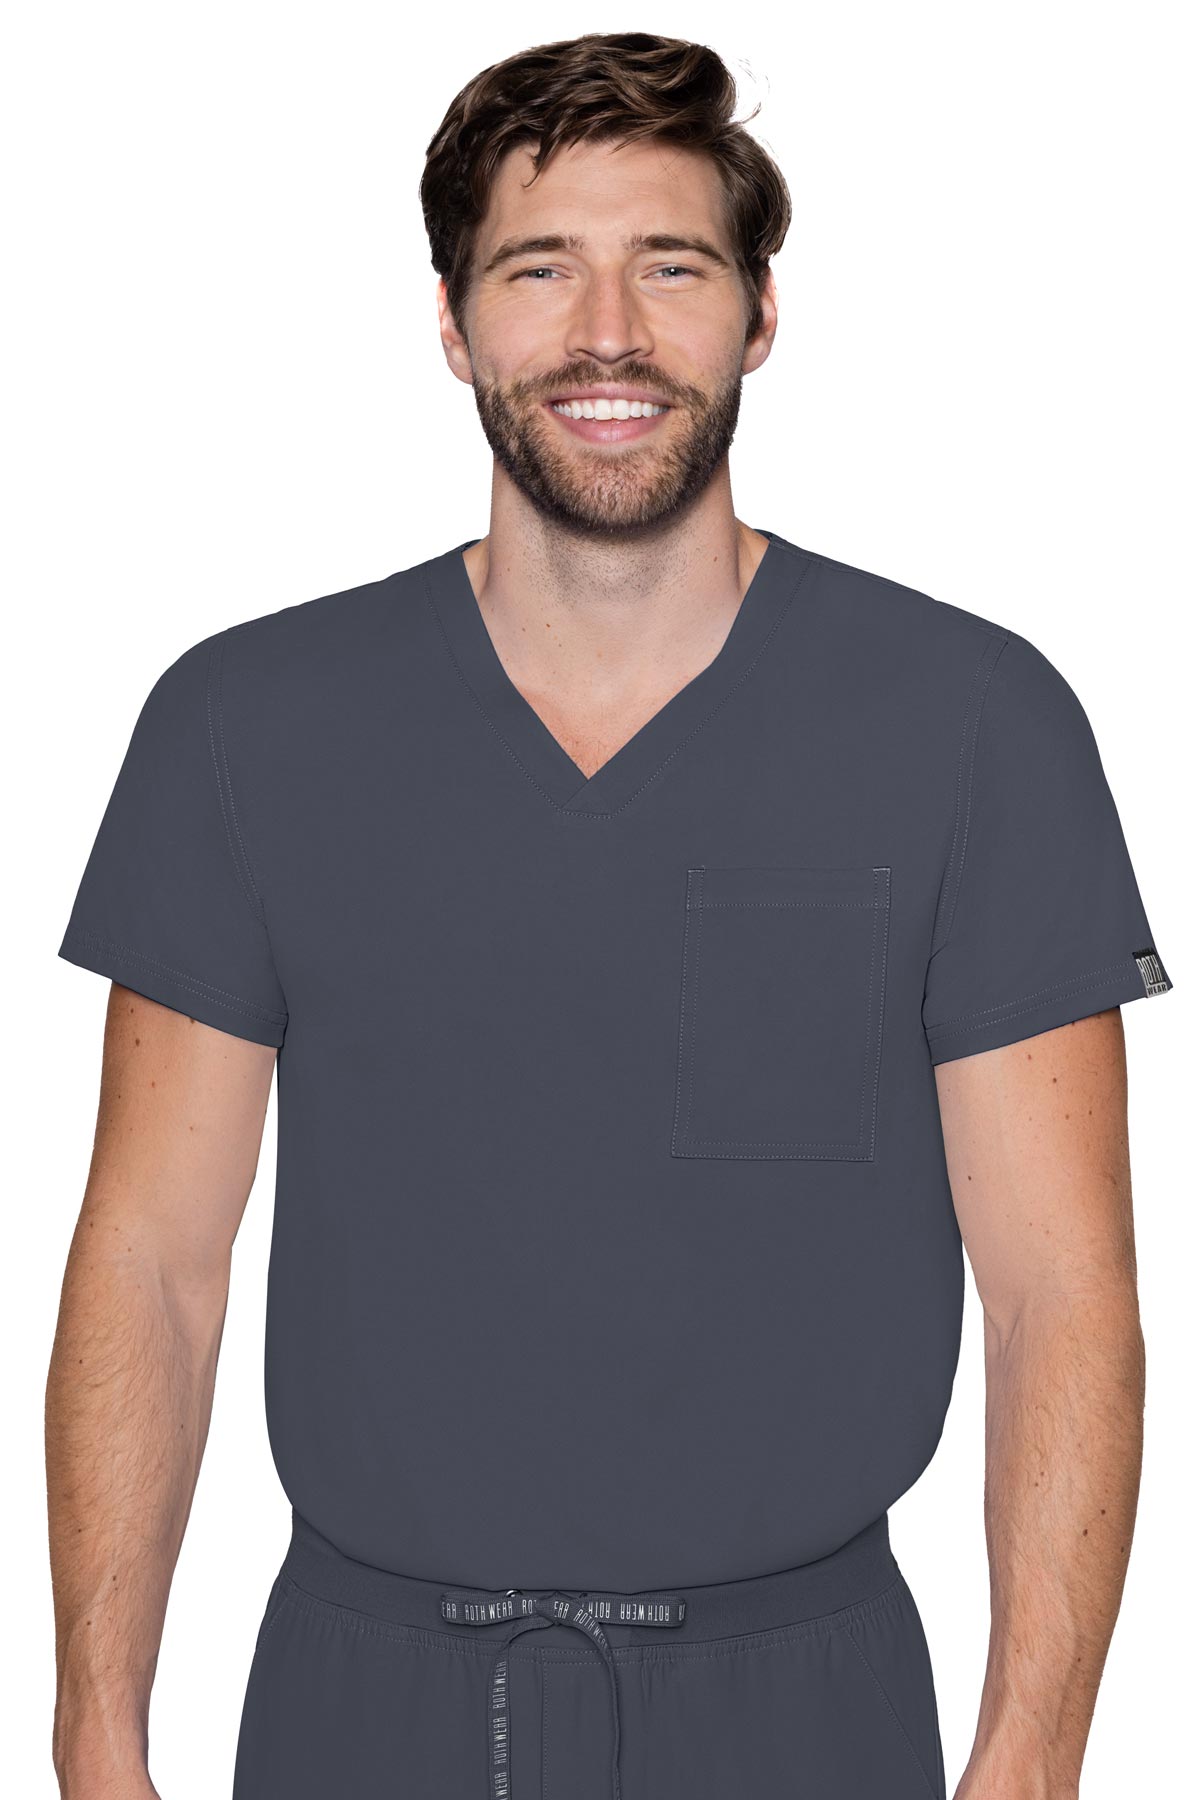 Med Couture Men's Scrub Top RothWear Insight in pewter at Parker's Clothing and Shoes.